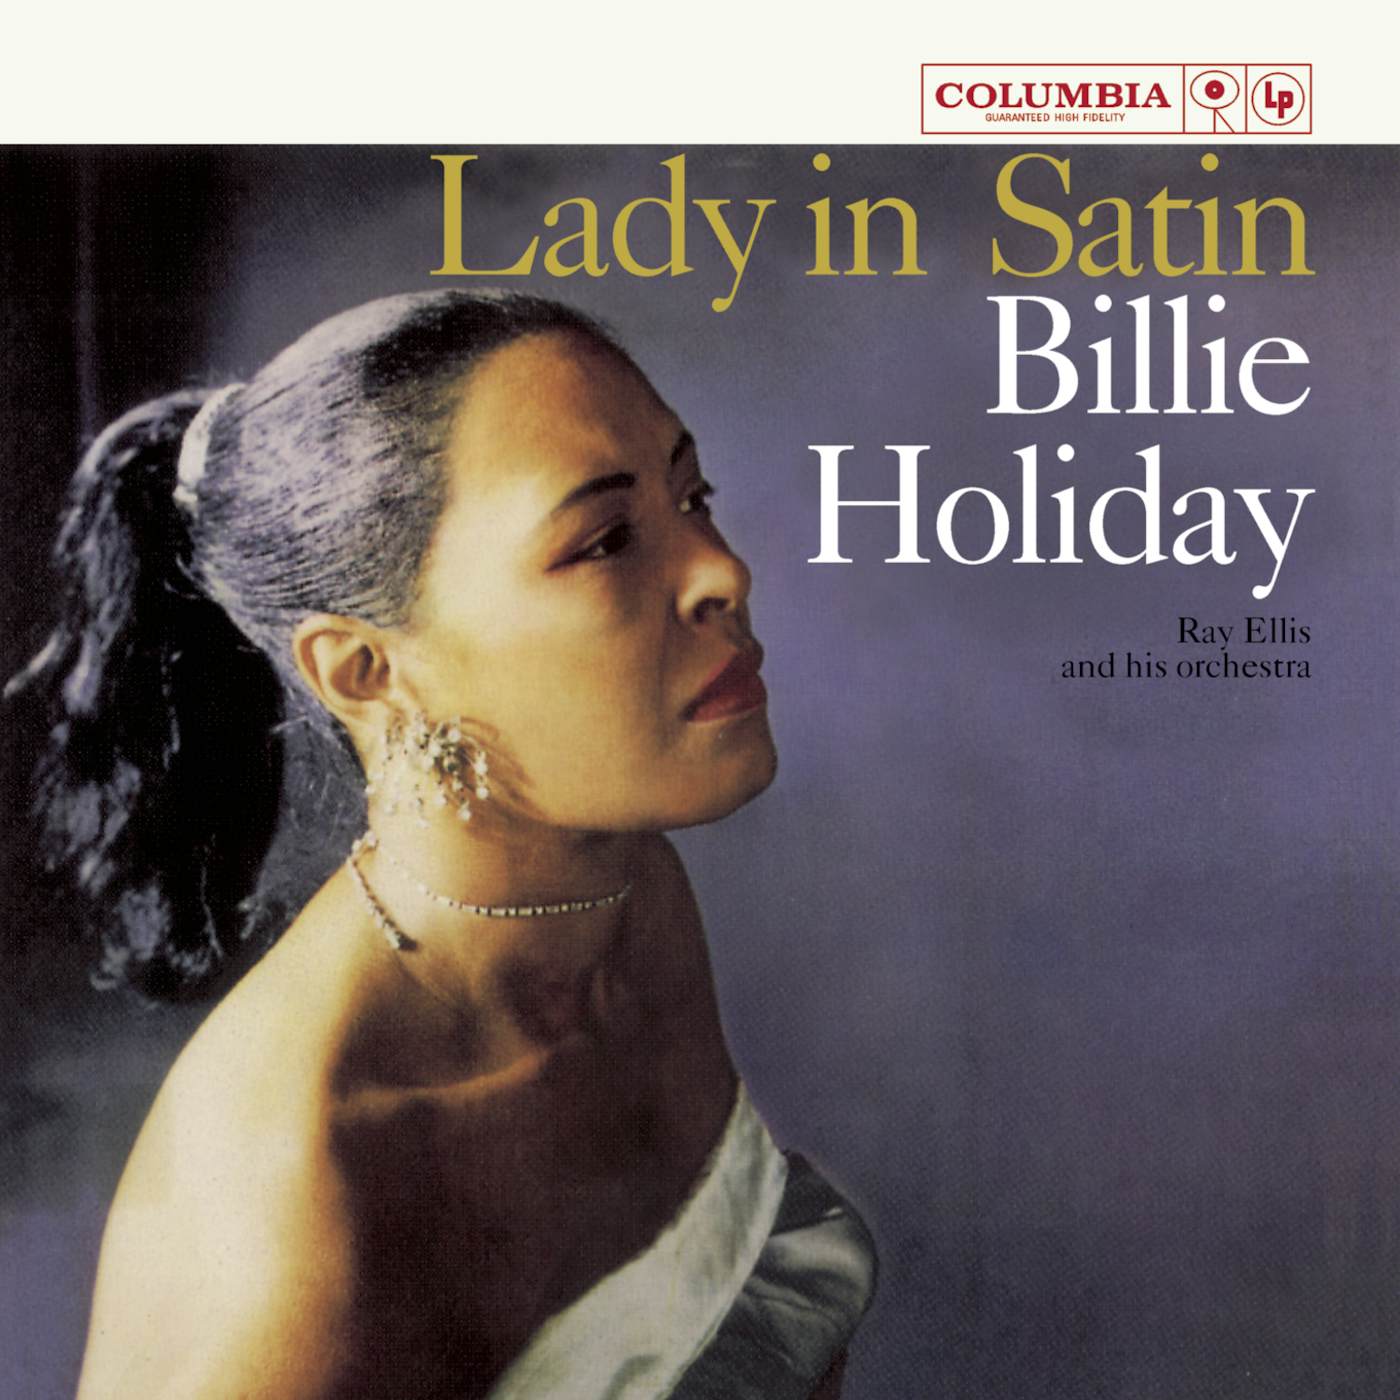 Billie Holiday LADY IN SATIN CD